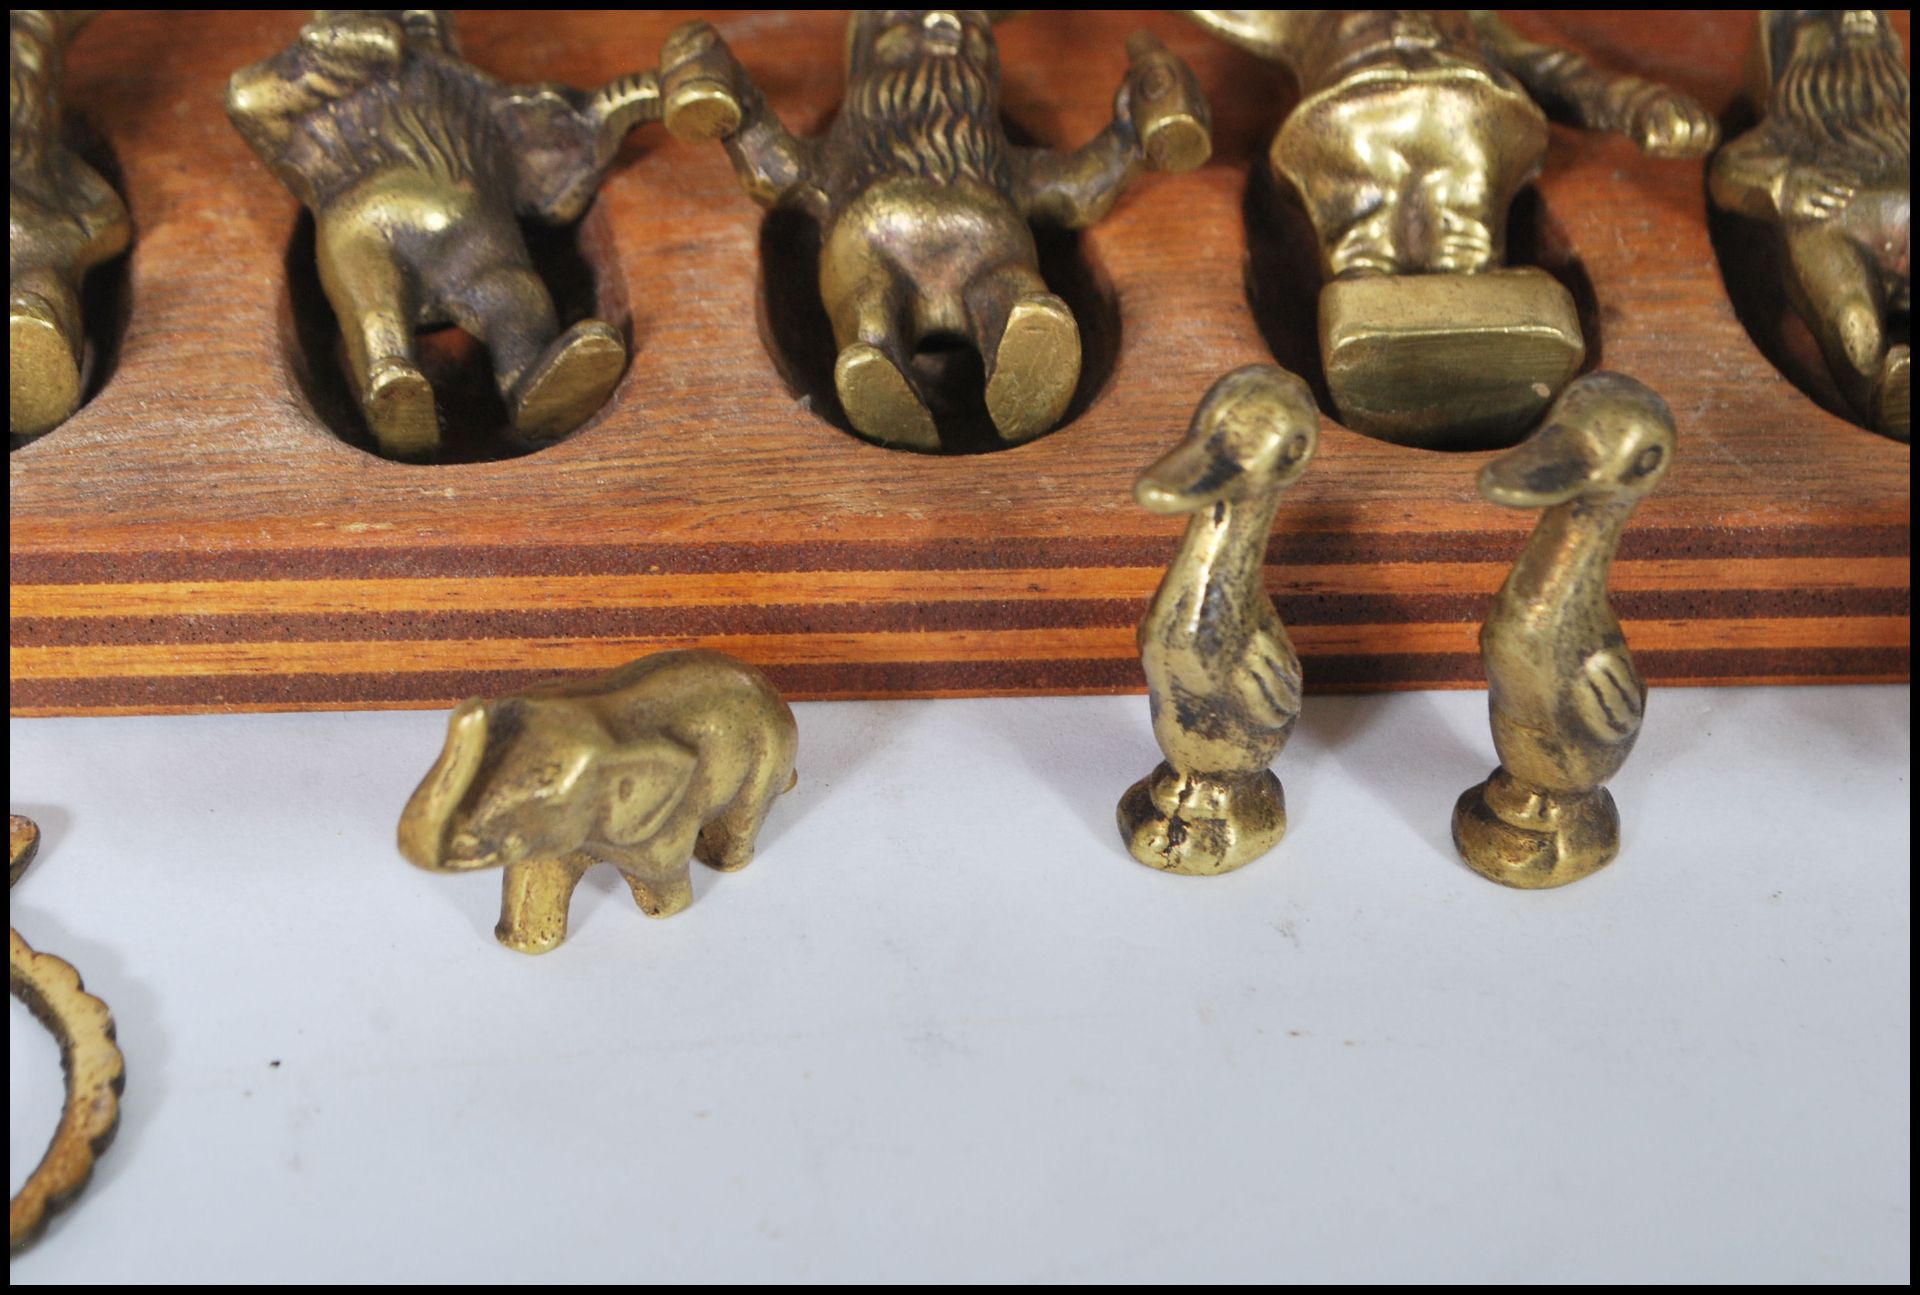 A collection of unusual brass ornamental figures to include mythical creatures, goblins, pixies - Bild 5 aus 11